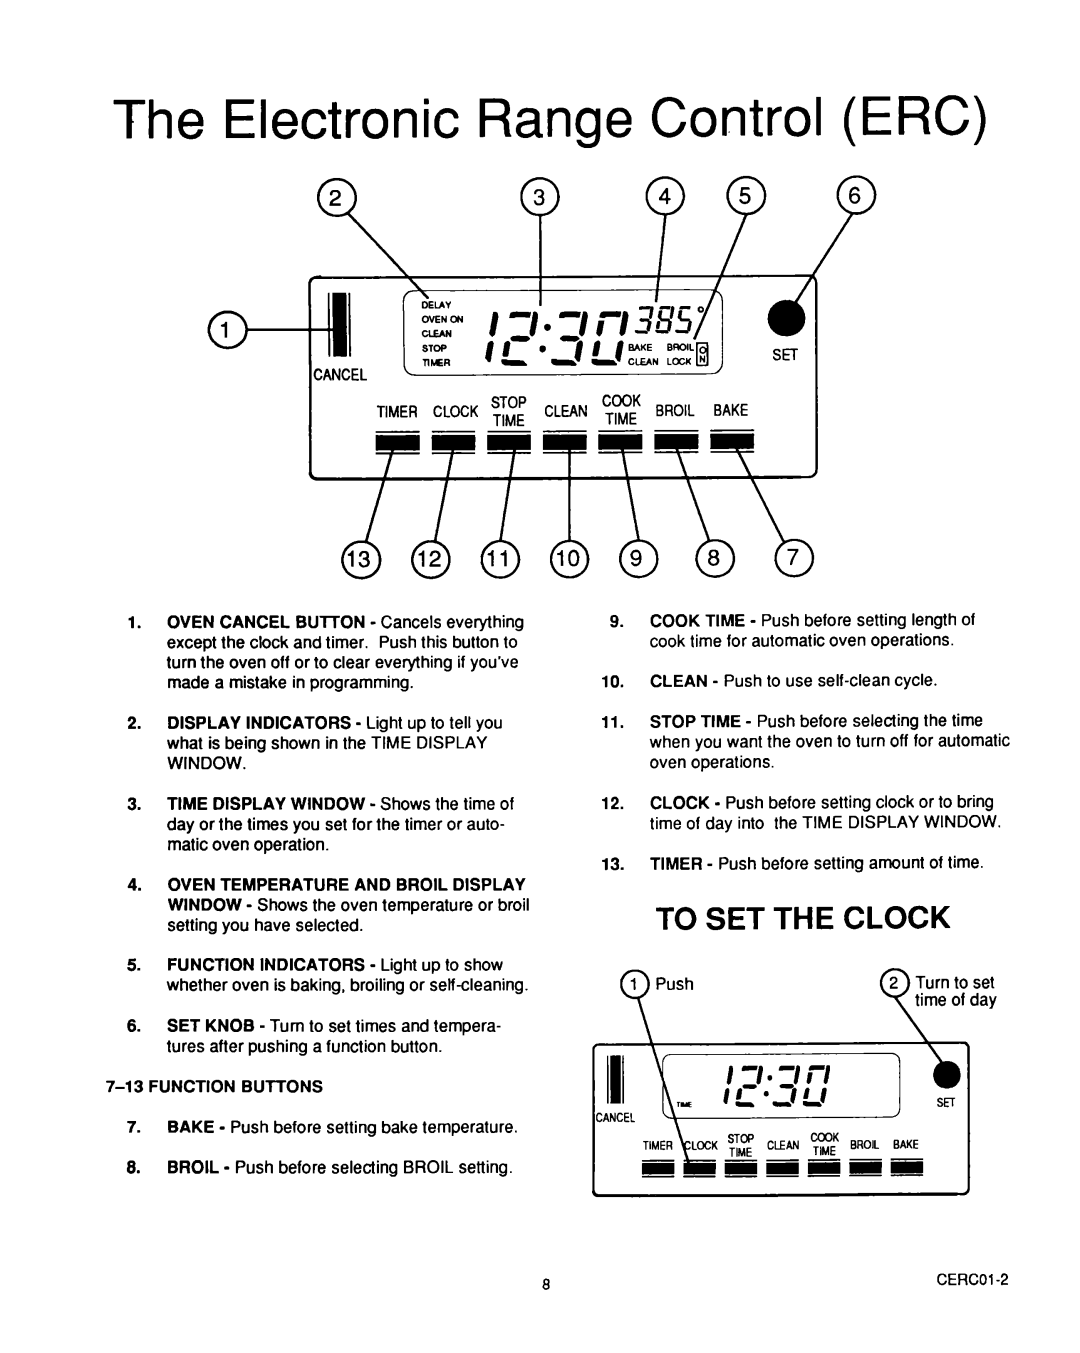 Roper D975 owner manual To Set The Clock, The Electronic Range Control ERC 